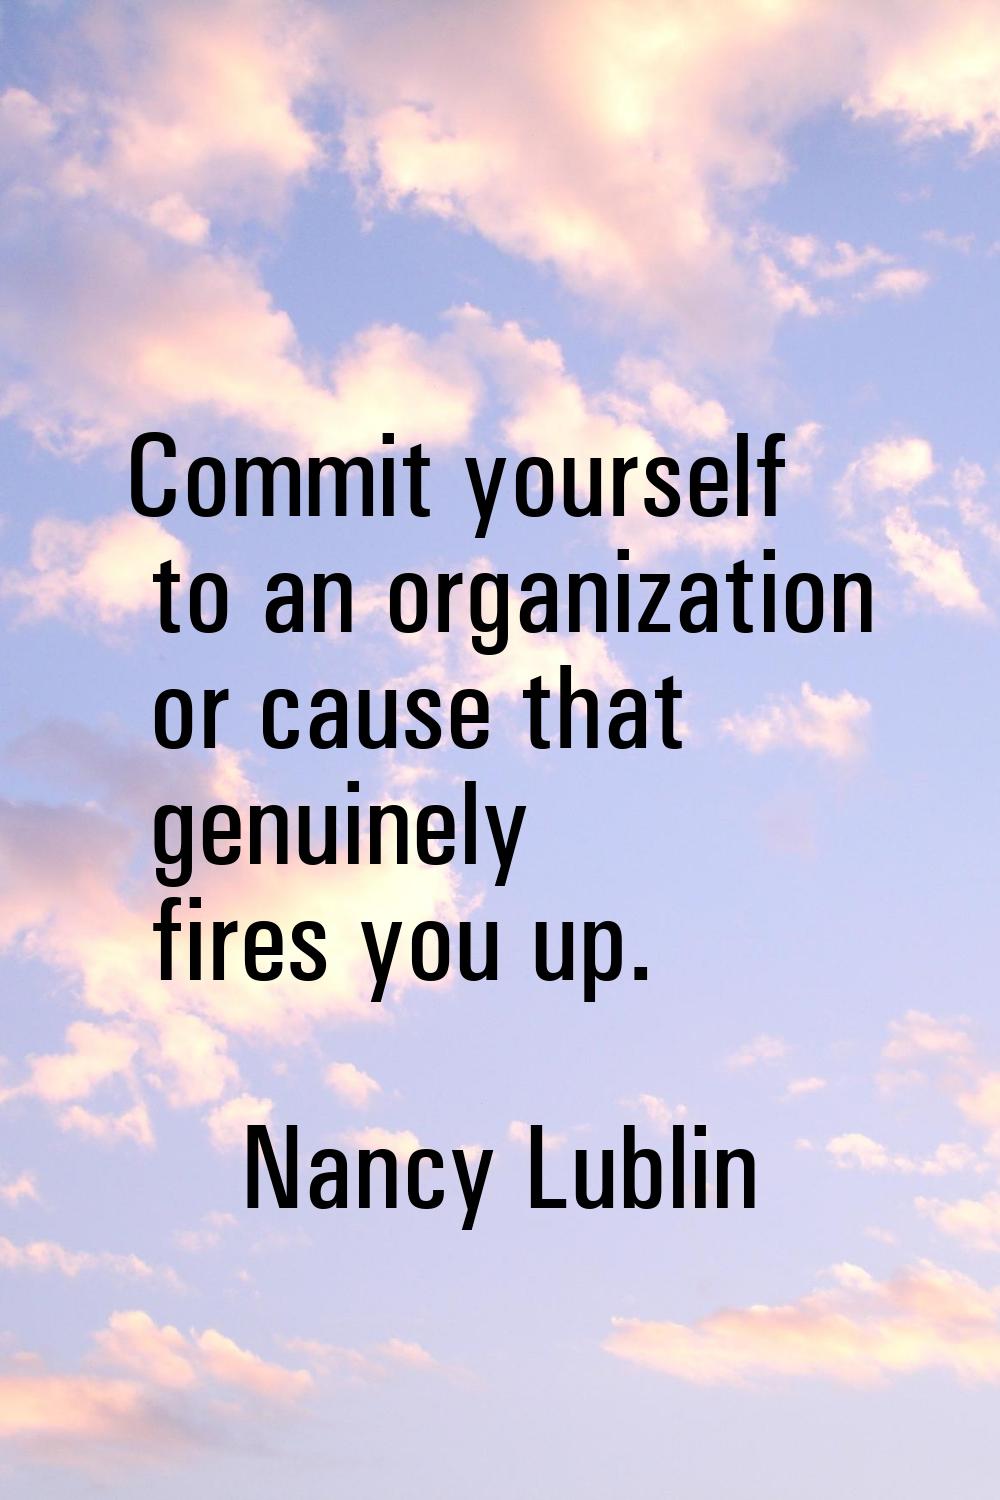 Commit yourself to an organization or cause that genuinely fires you up.